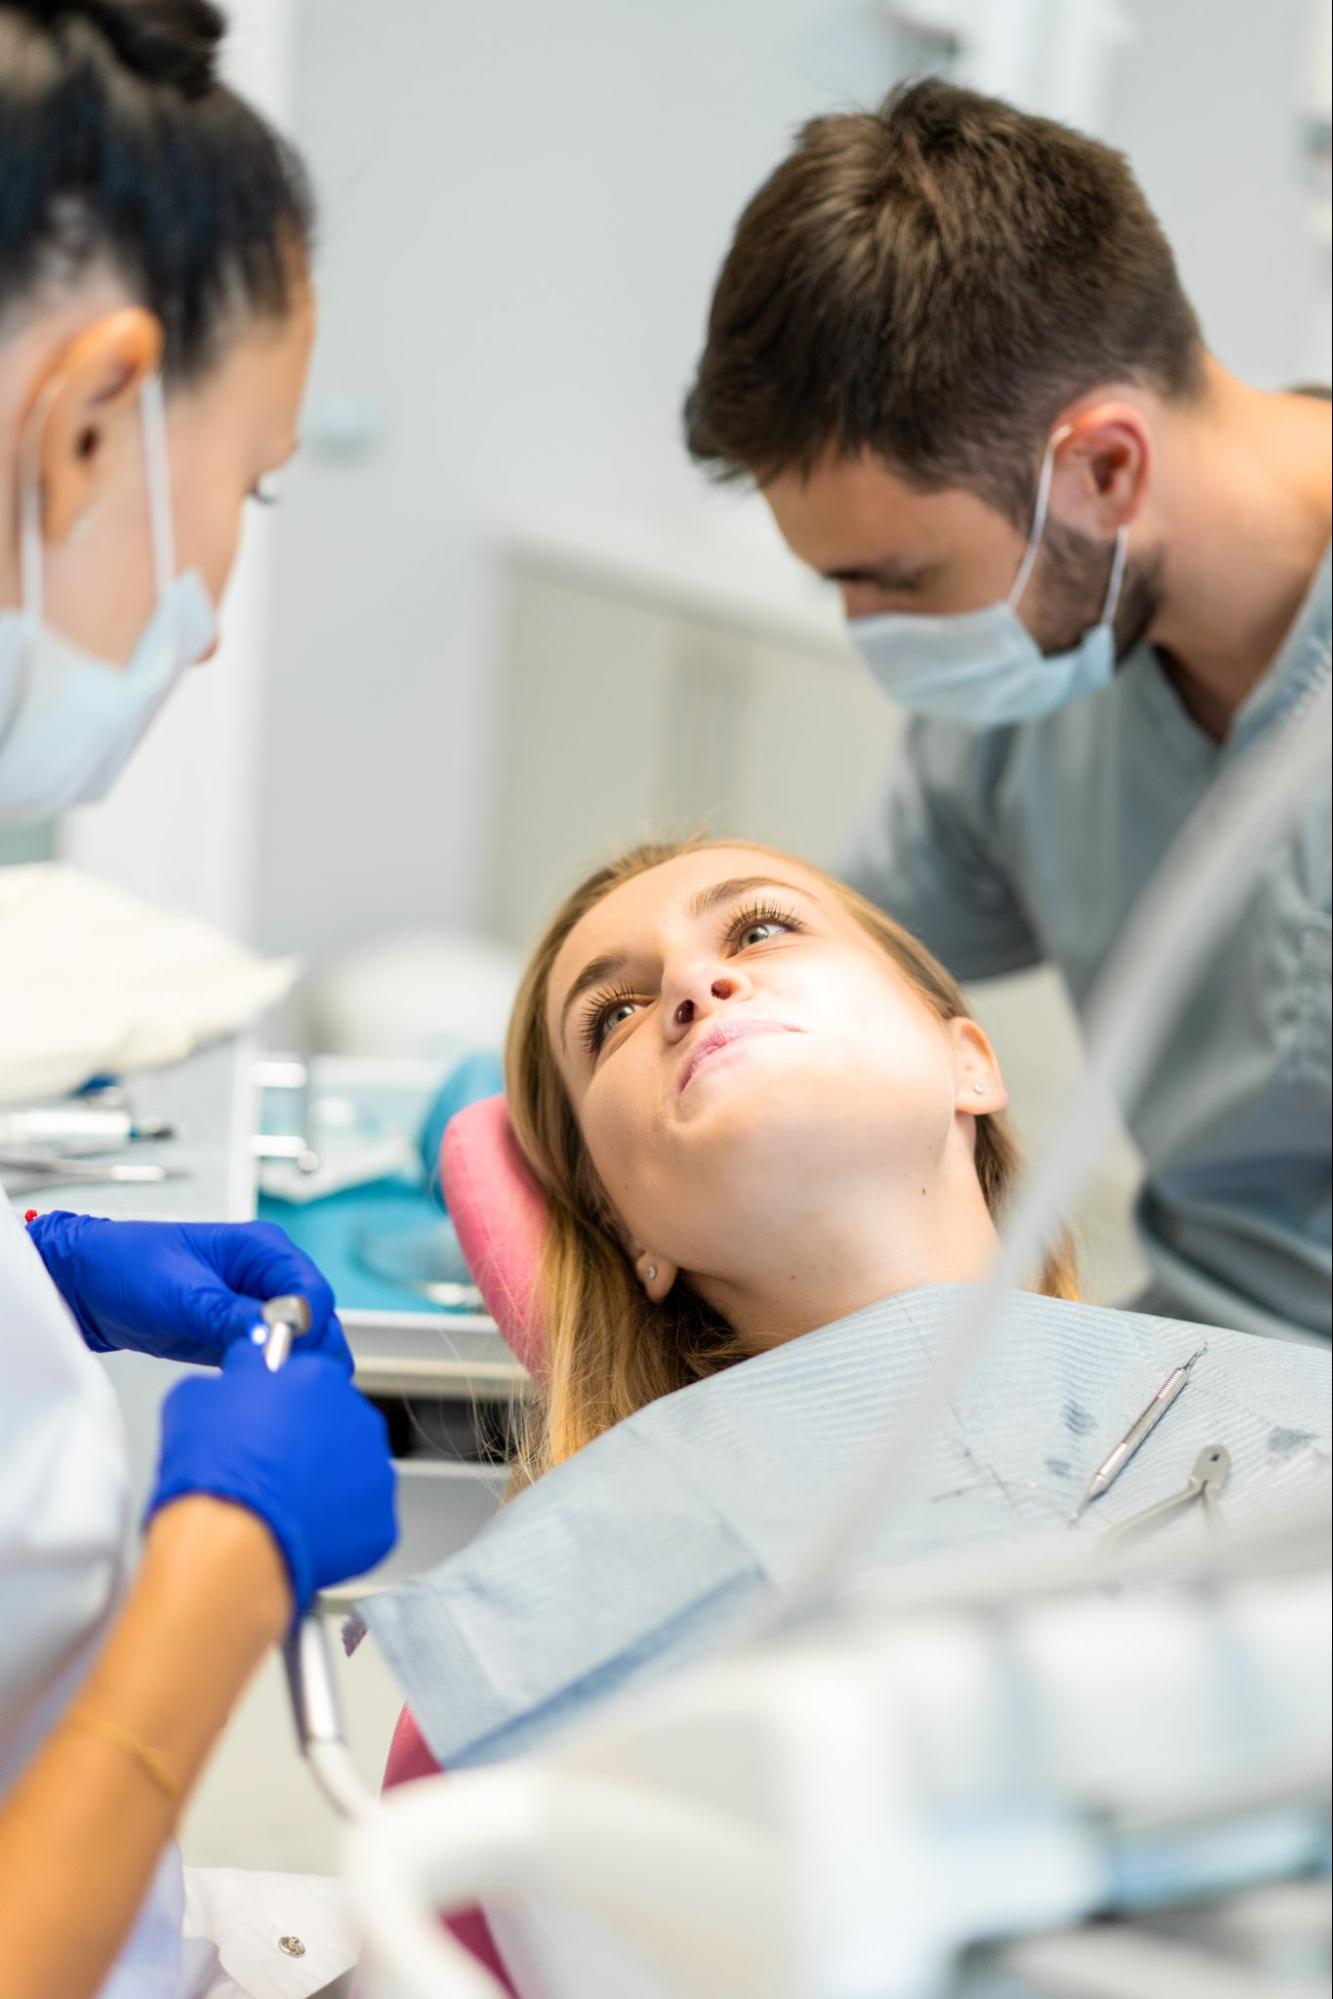 patient getting examined by dentist and hygienist